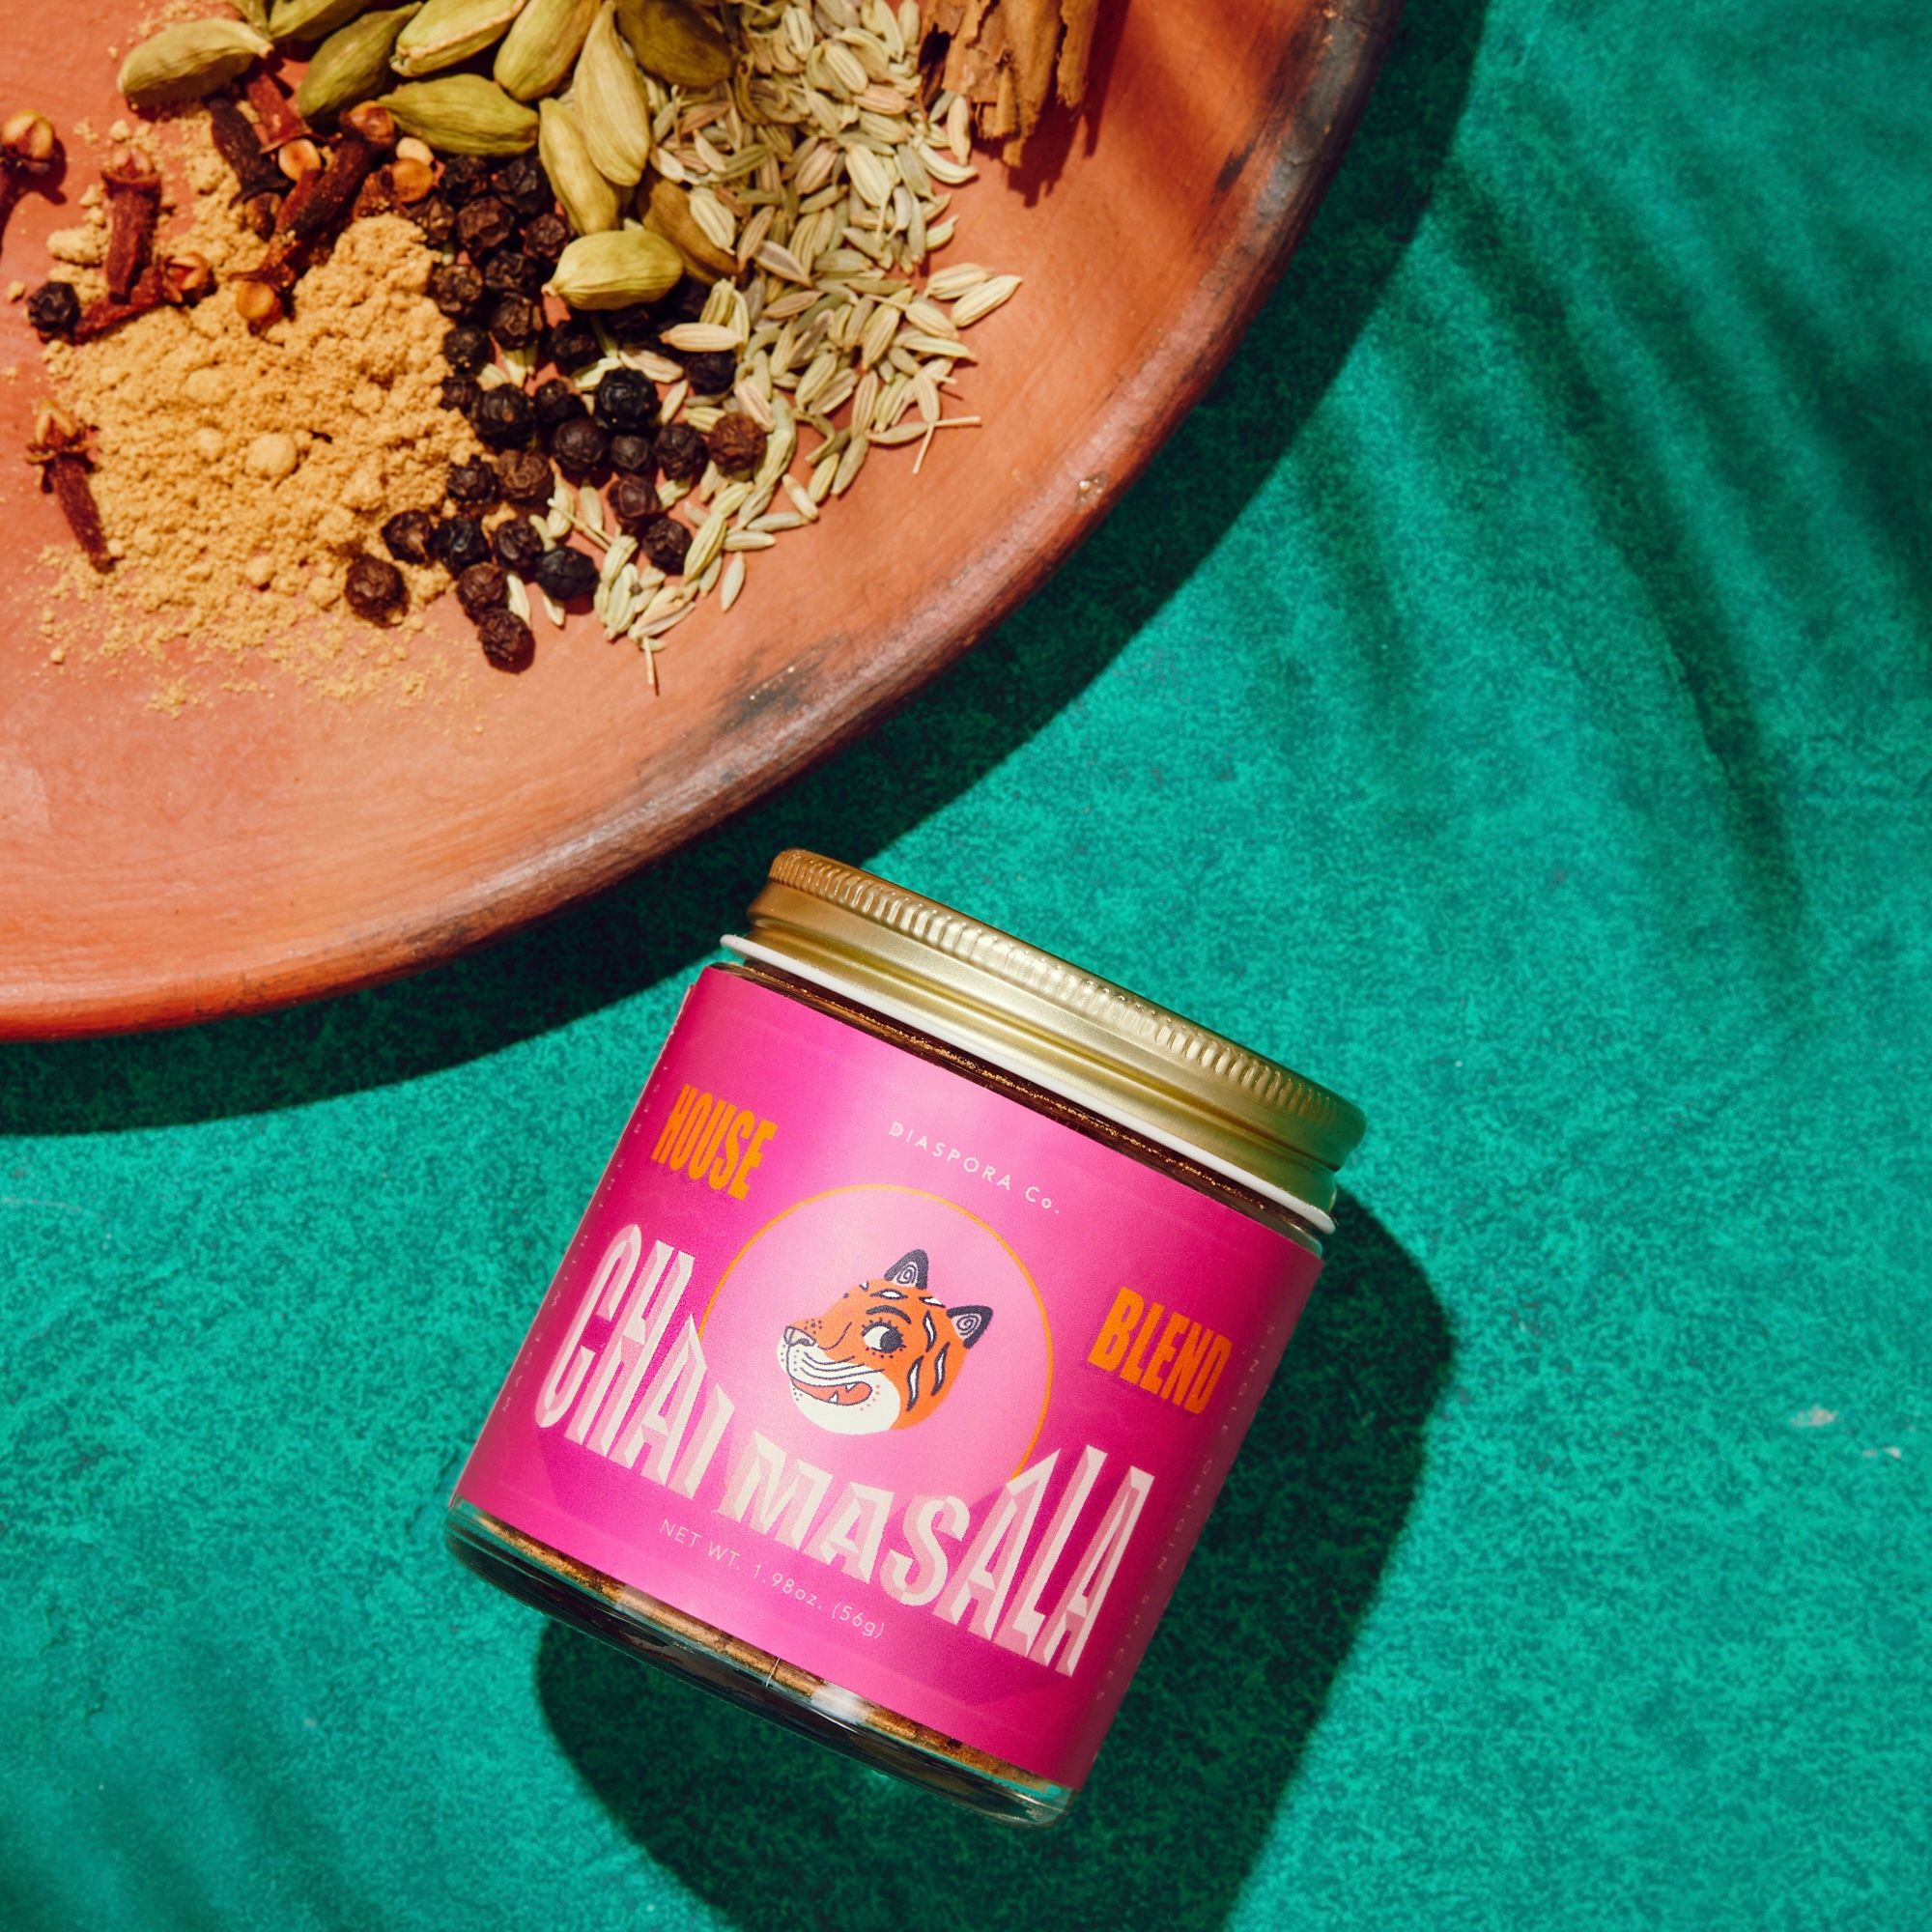 A jar wrapped with a hot pink label with a tiger illustration in the center with surrounding type that reads "House Blend Chai Masala", sits on a teal background next to a plate with spices